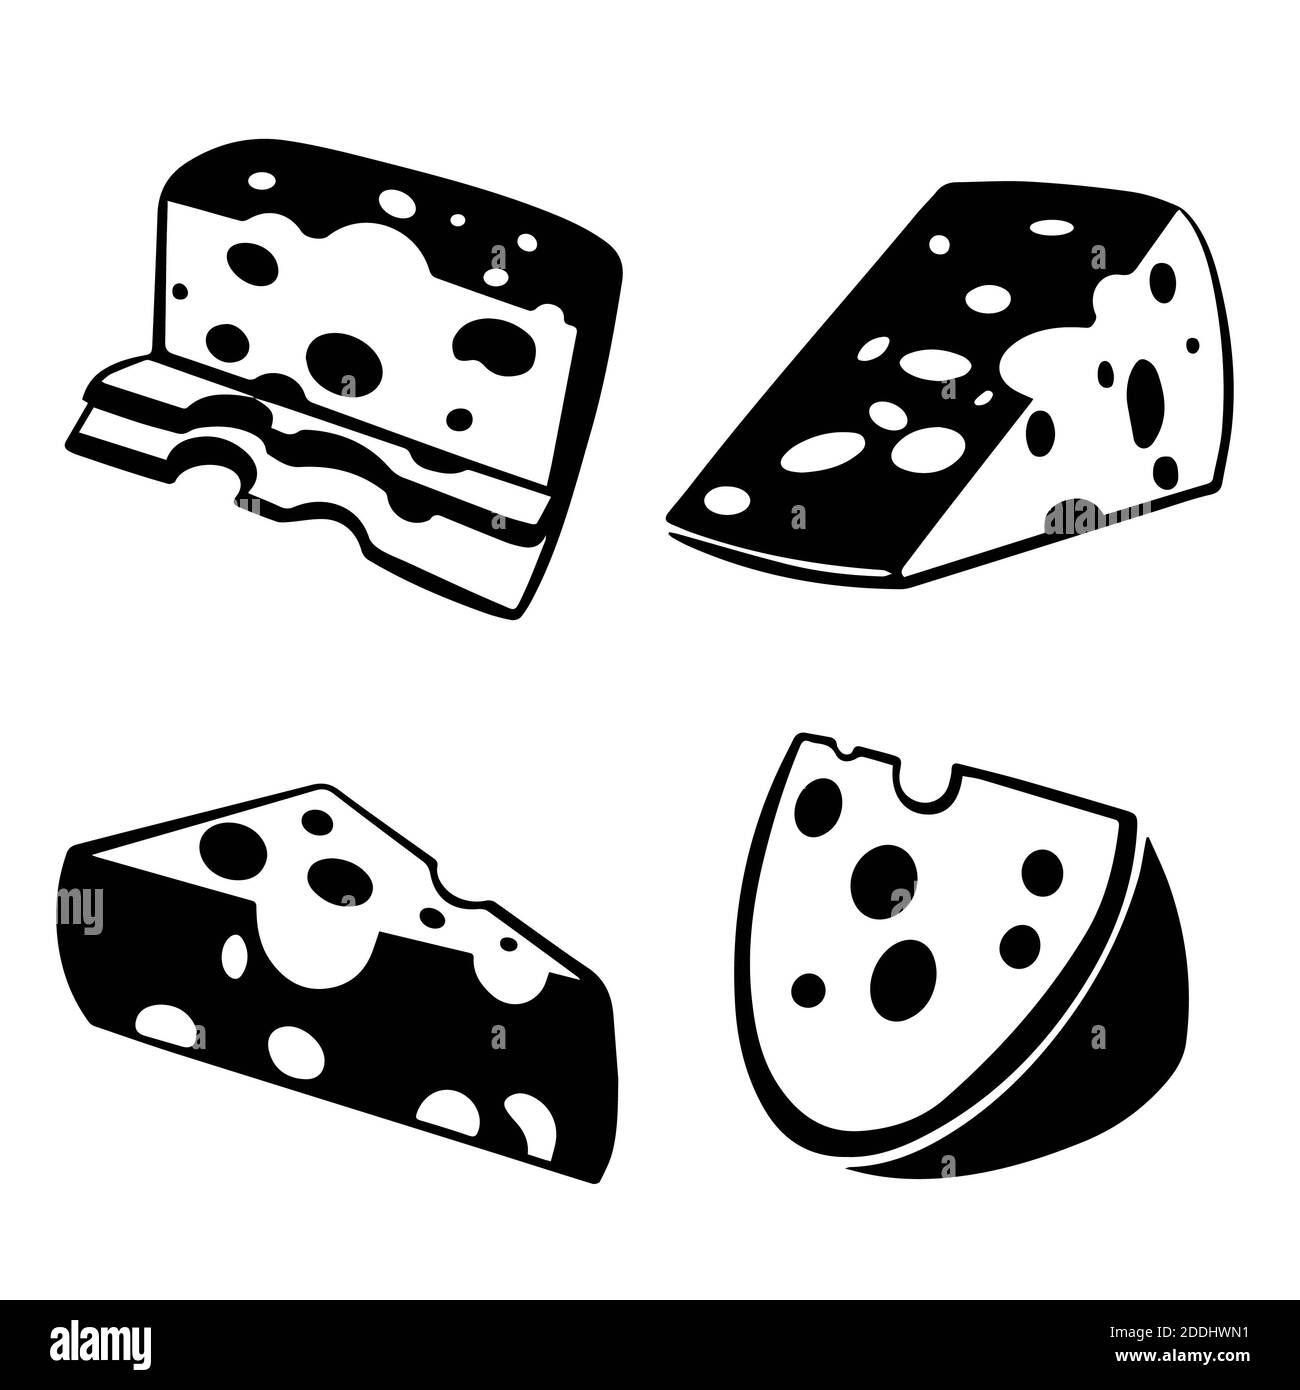 Cheese vector set on isolated background. Icon cheeses illustration monochrome. Stock Photo